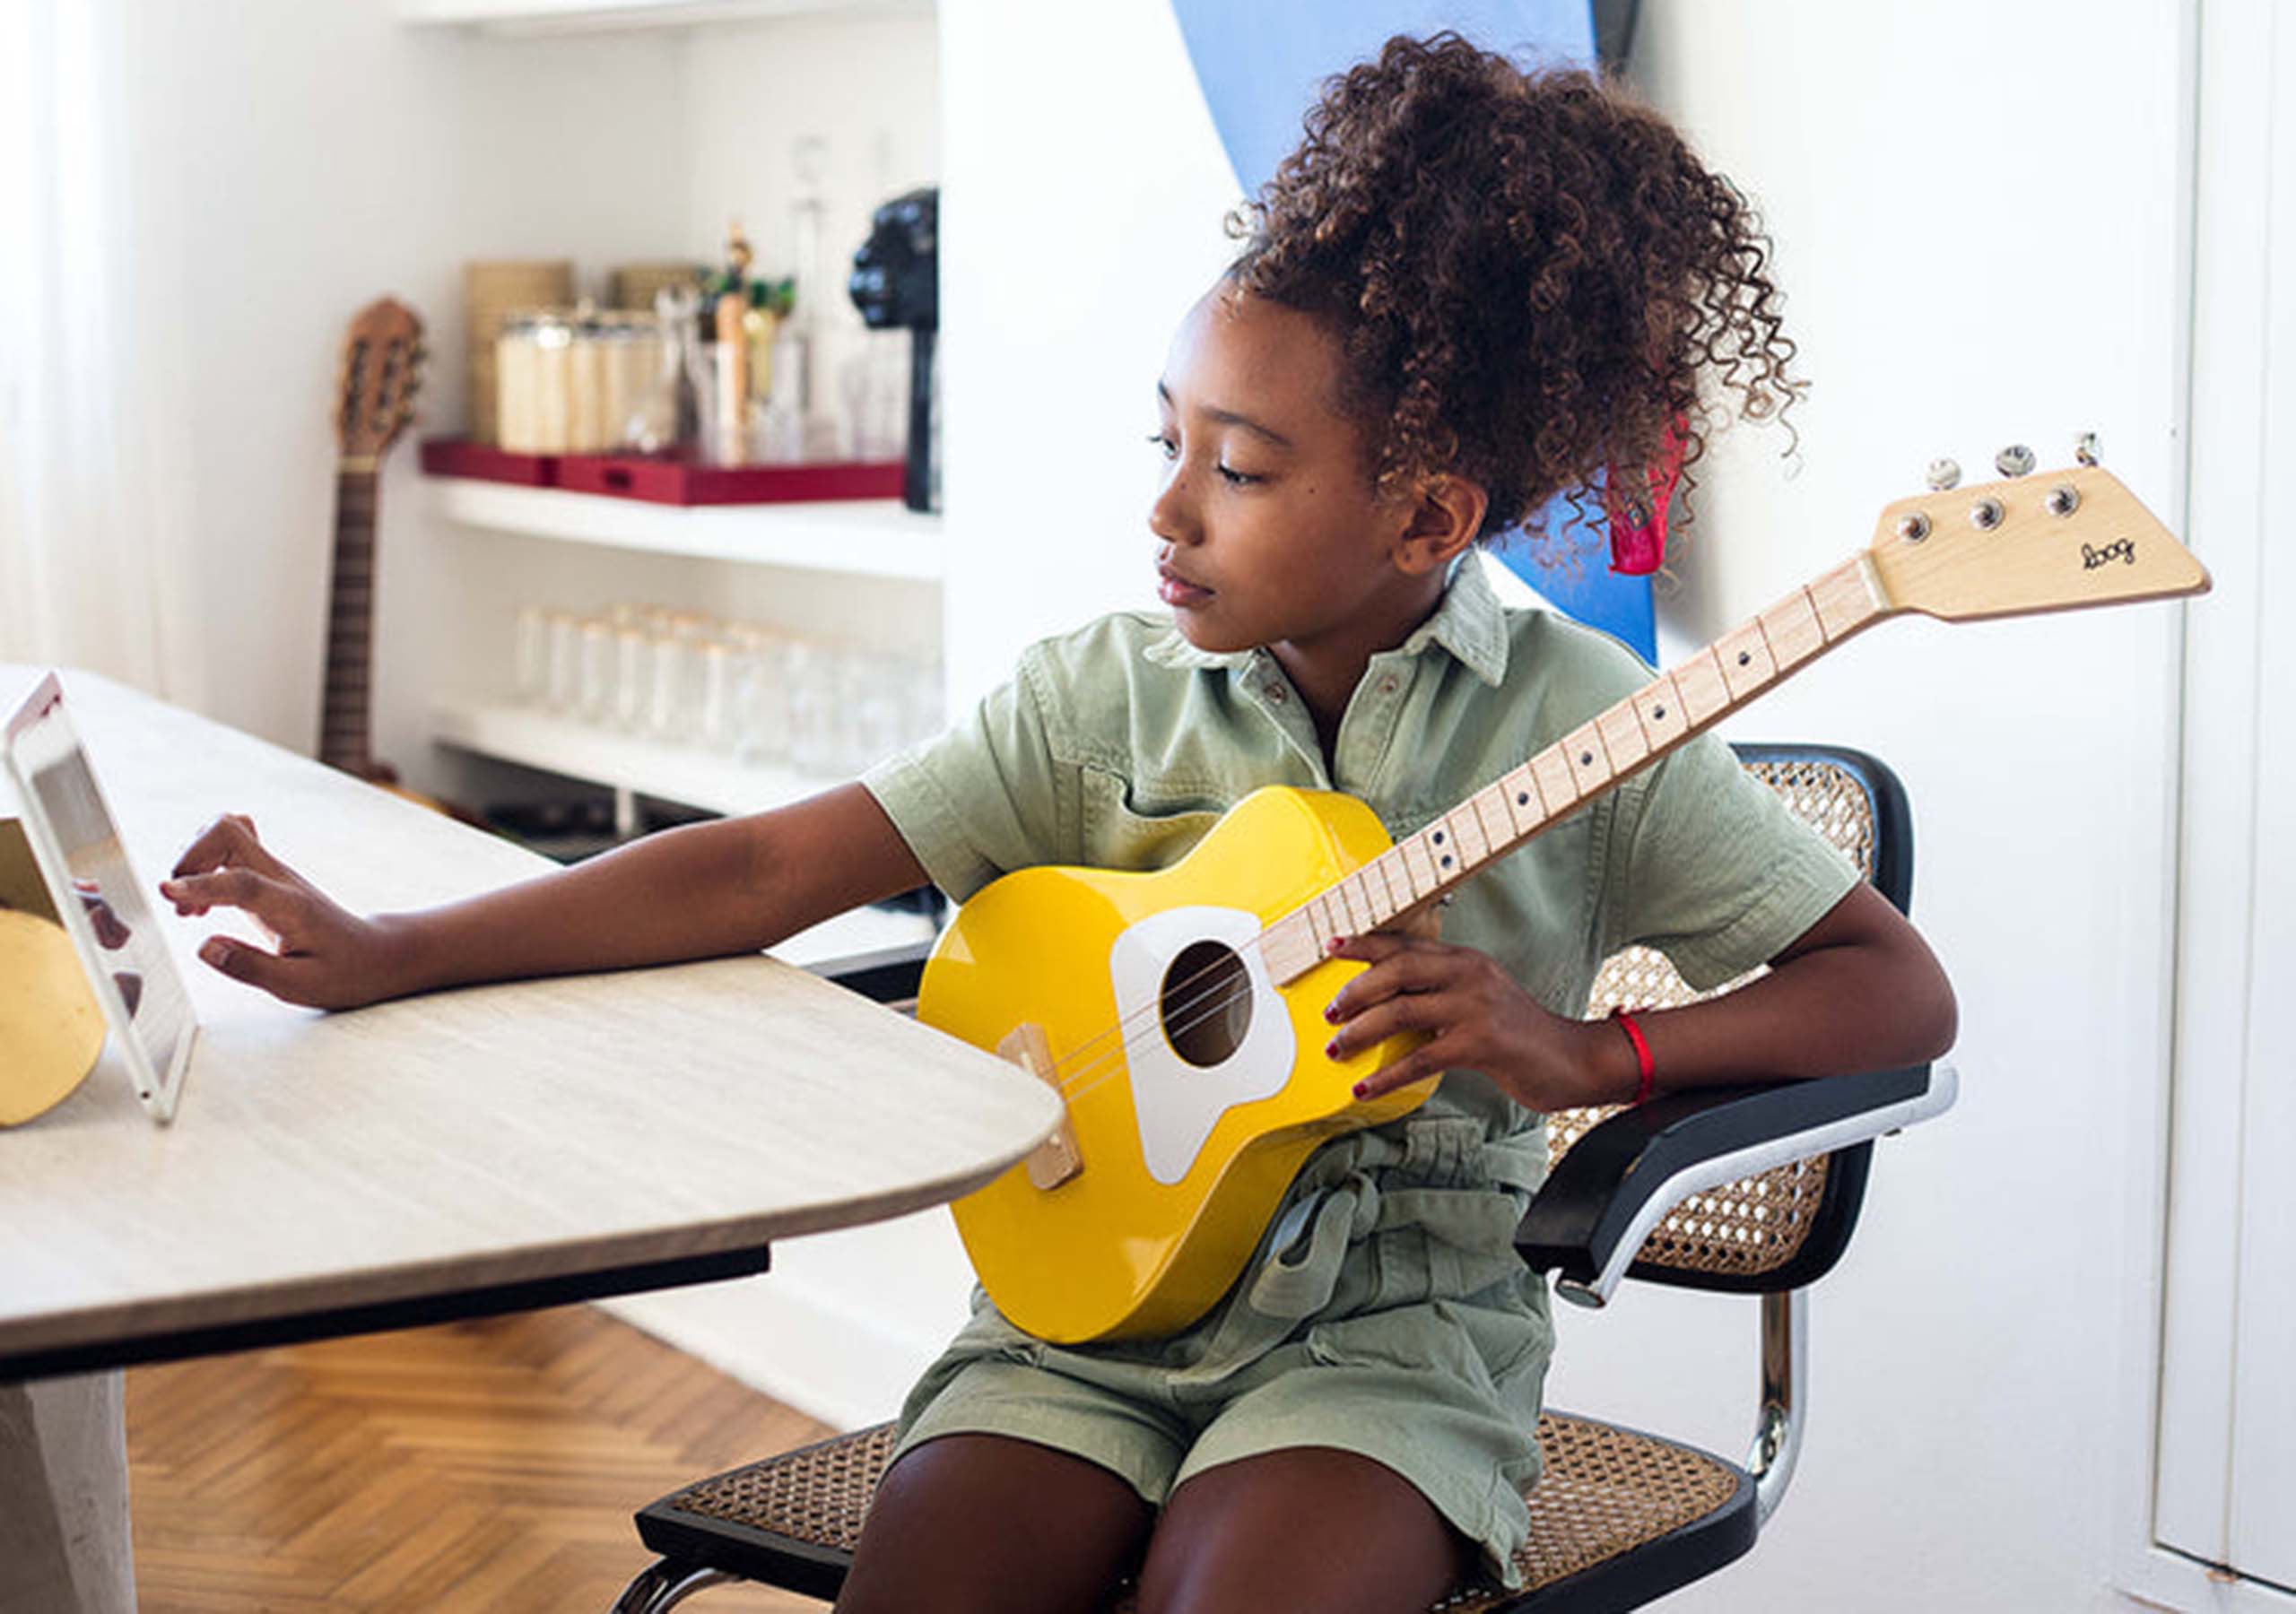 A young child with a yellow guitar sits at a table, touching a tablet screen.